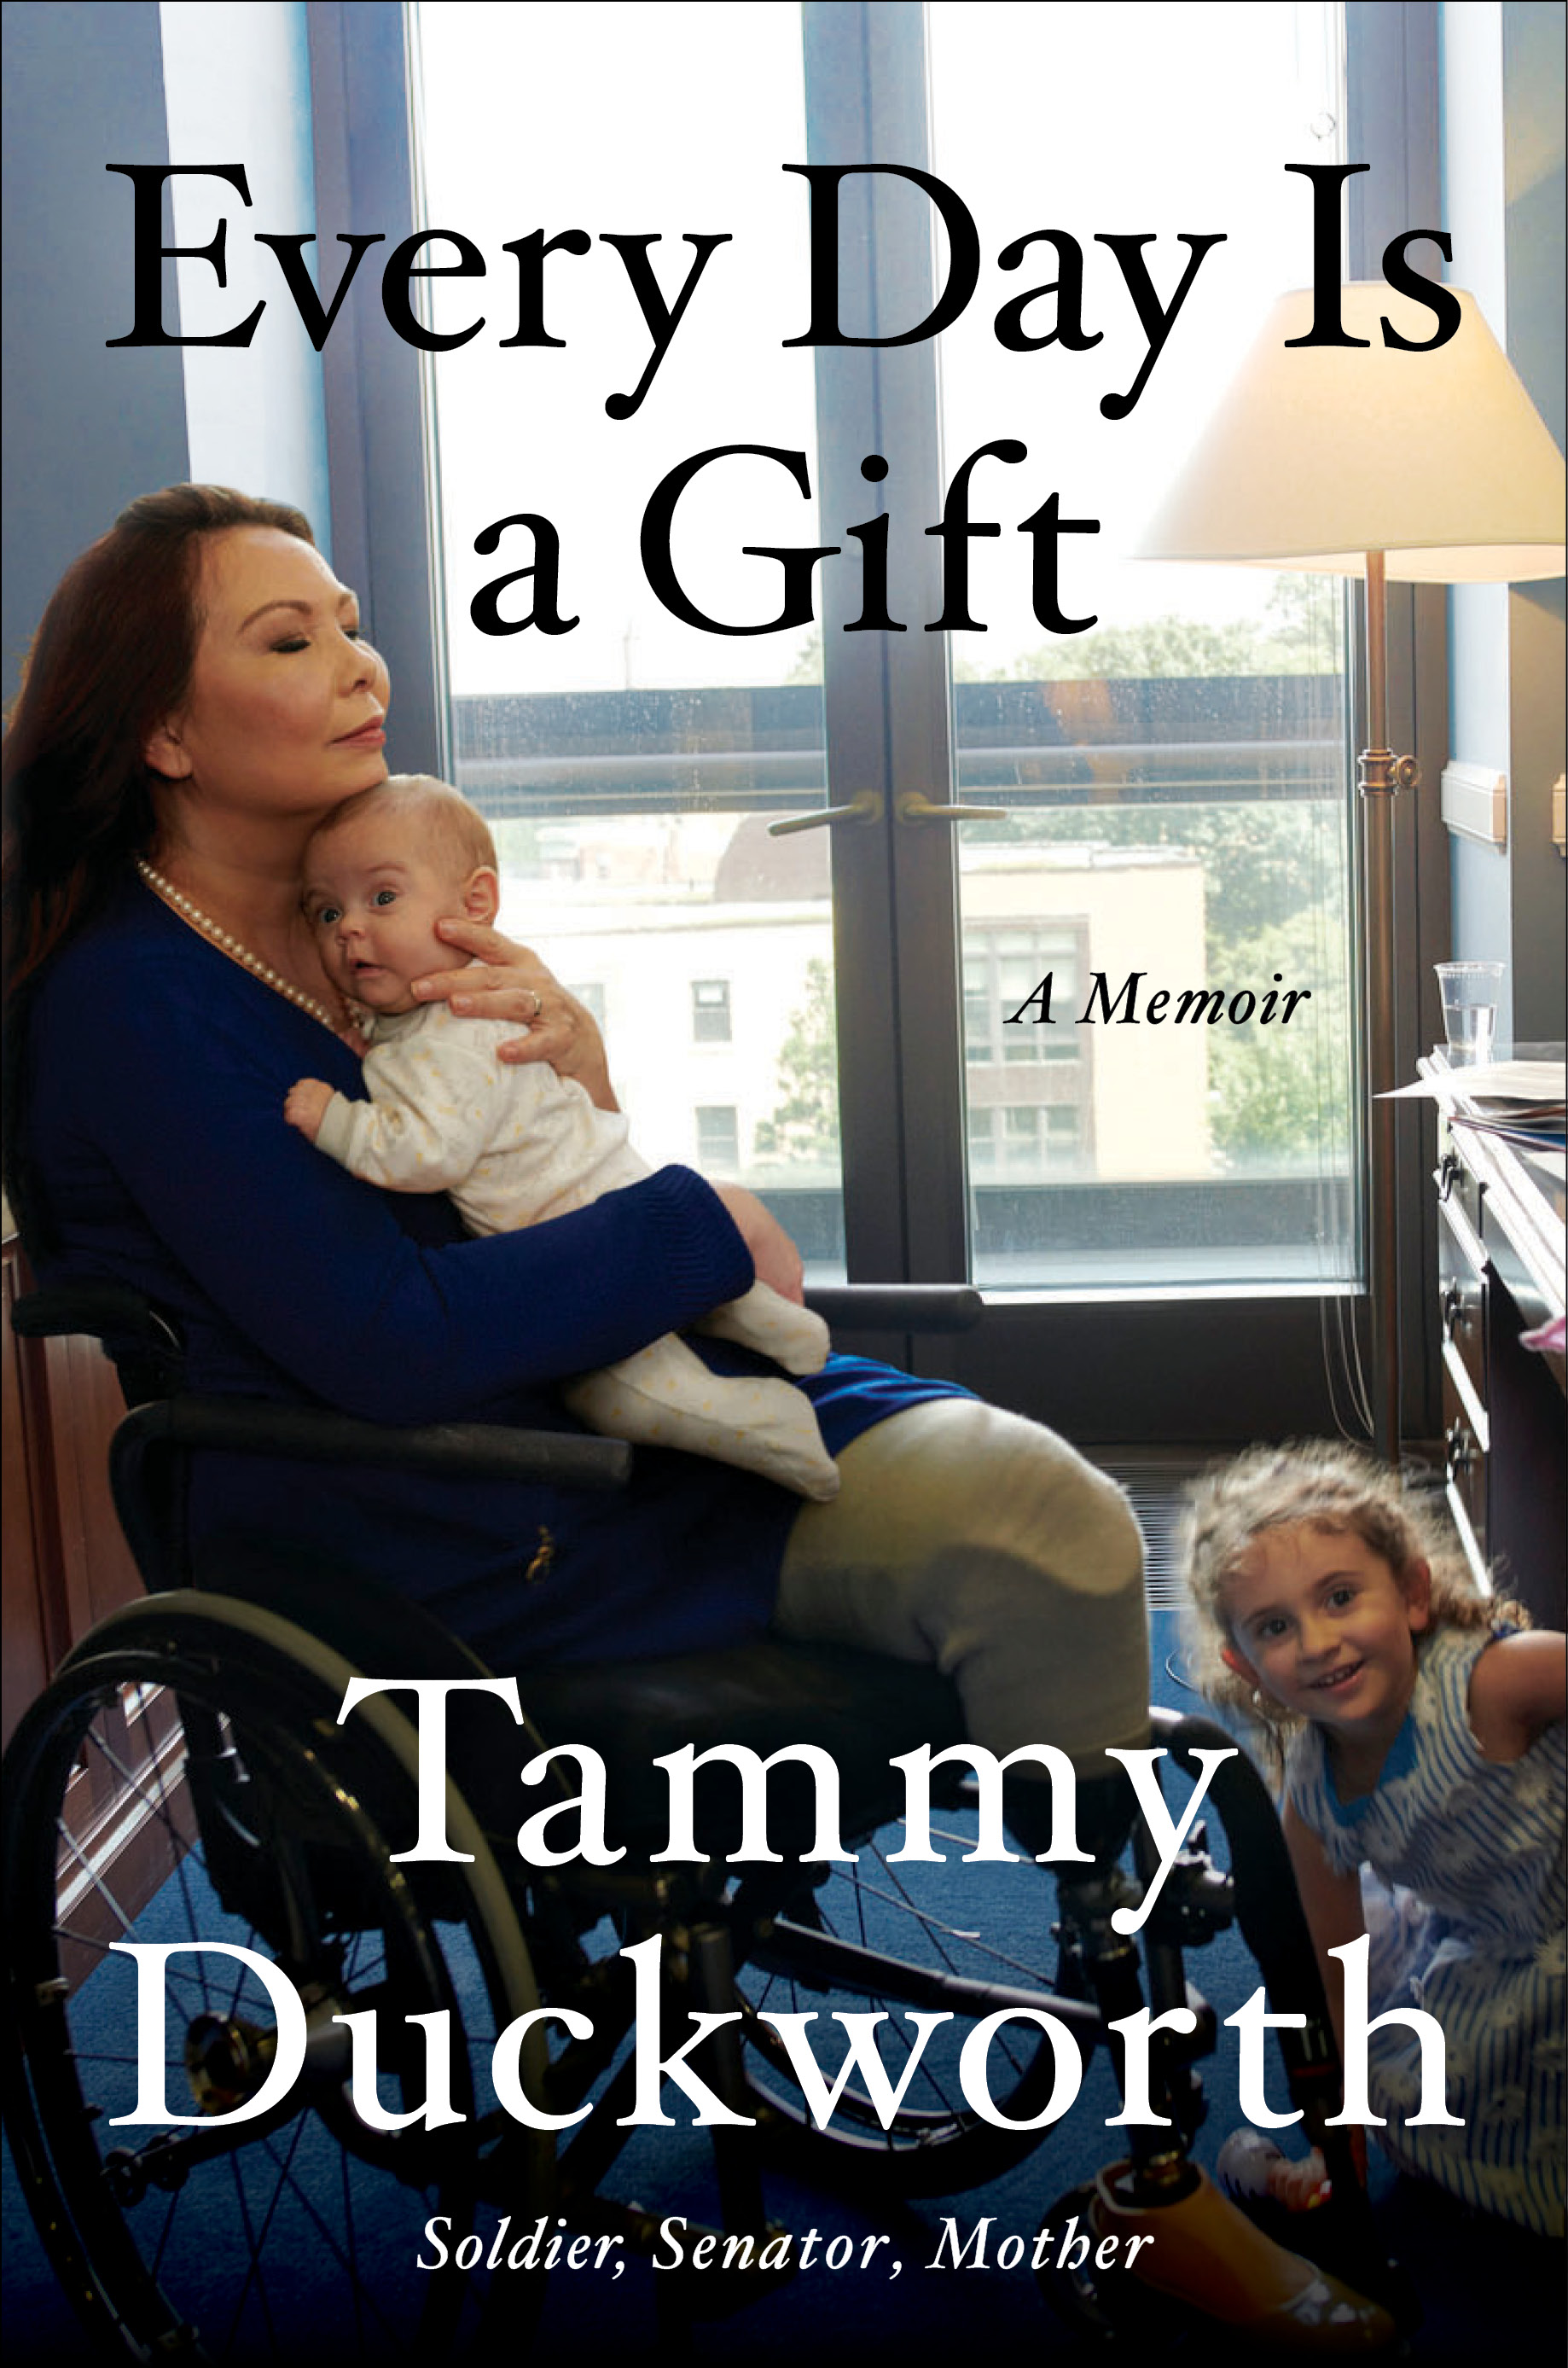 Virtual event with Senator Tammy Duckworth/Every Day Is a Gift